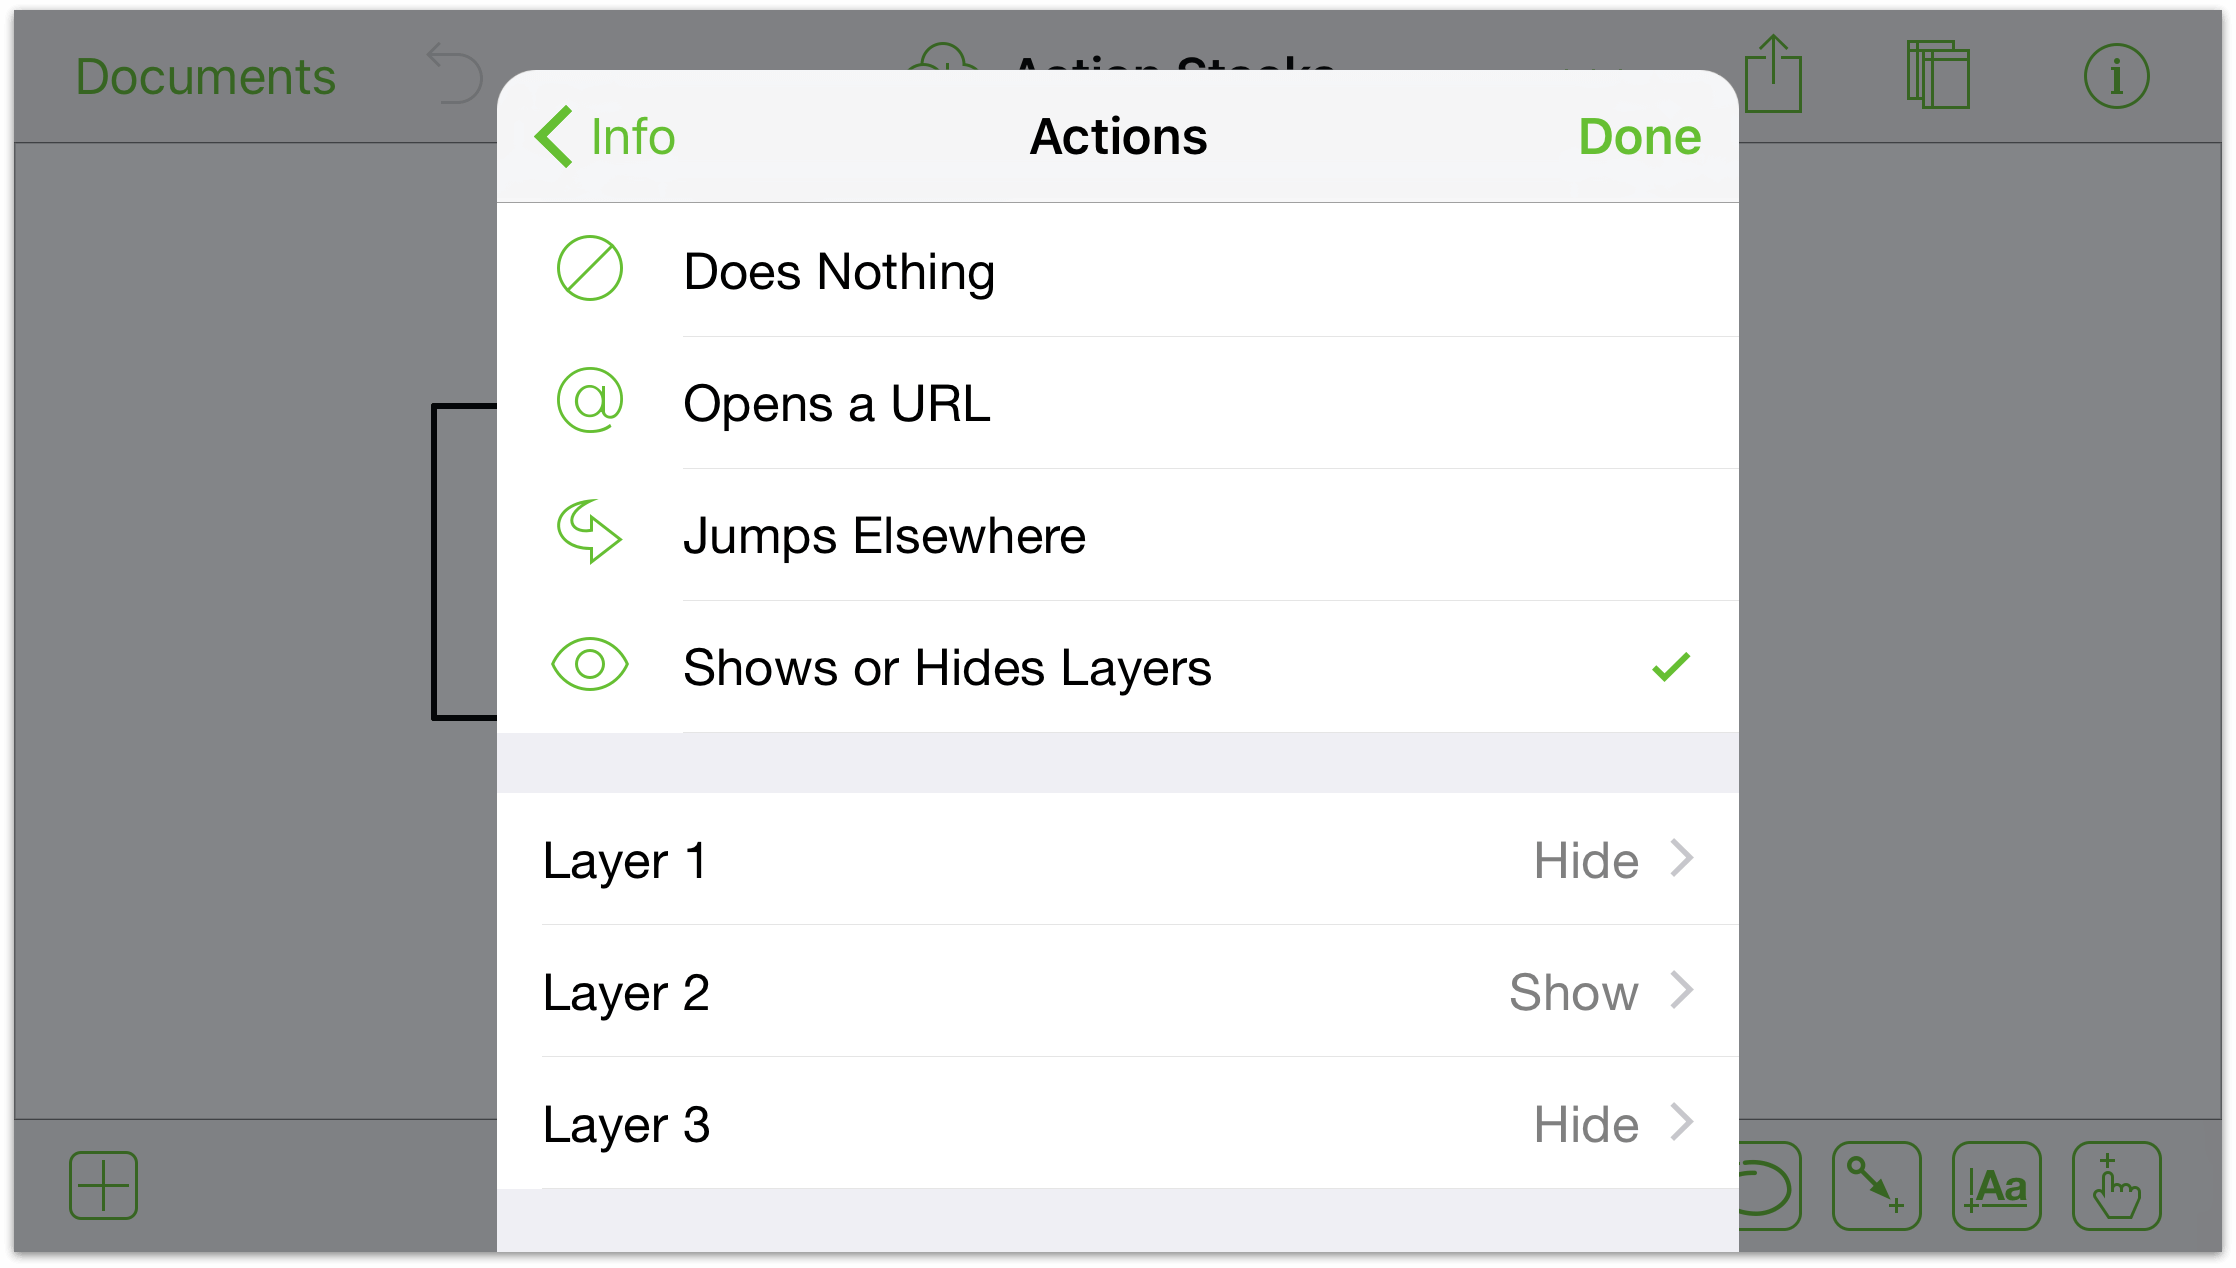 The actions for Layer 1